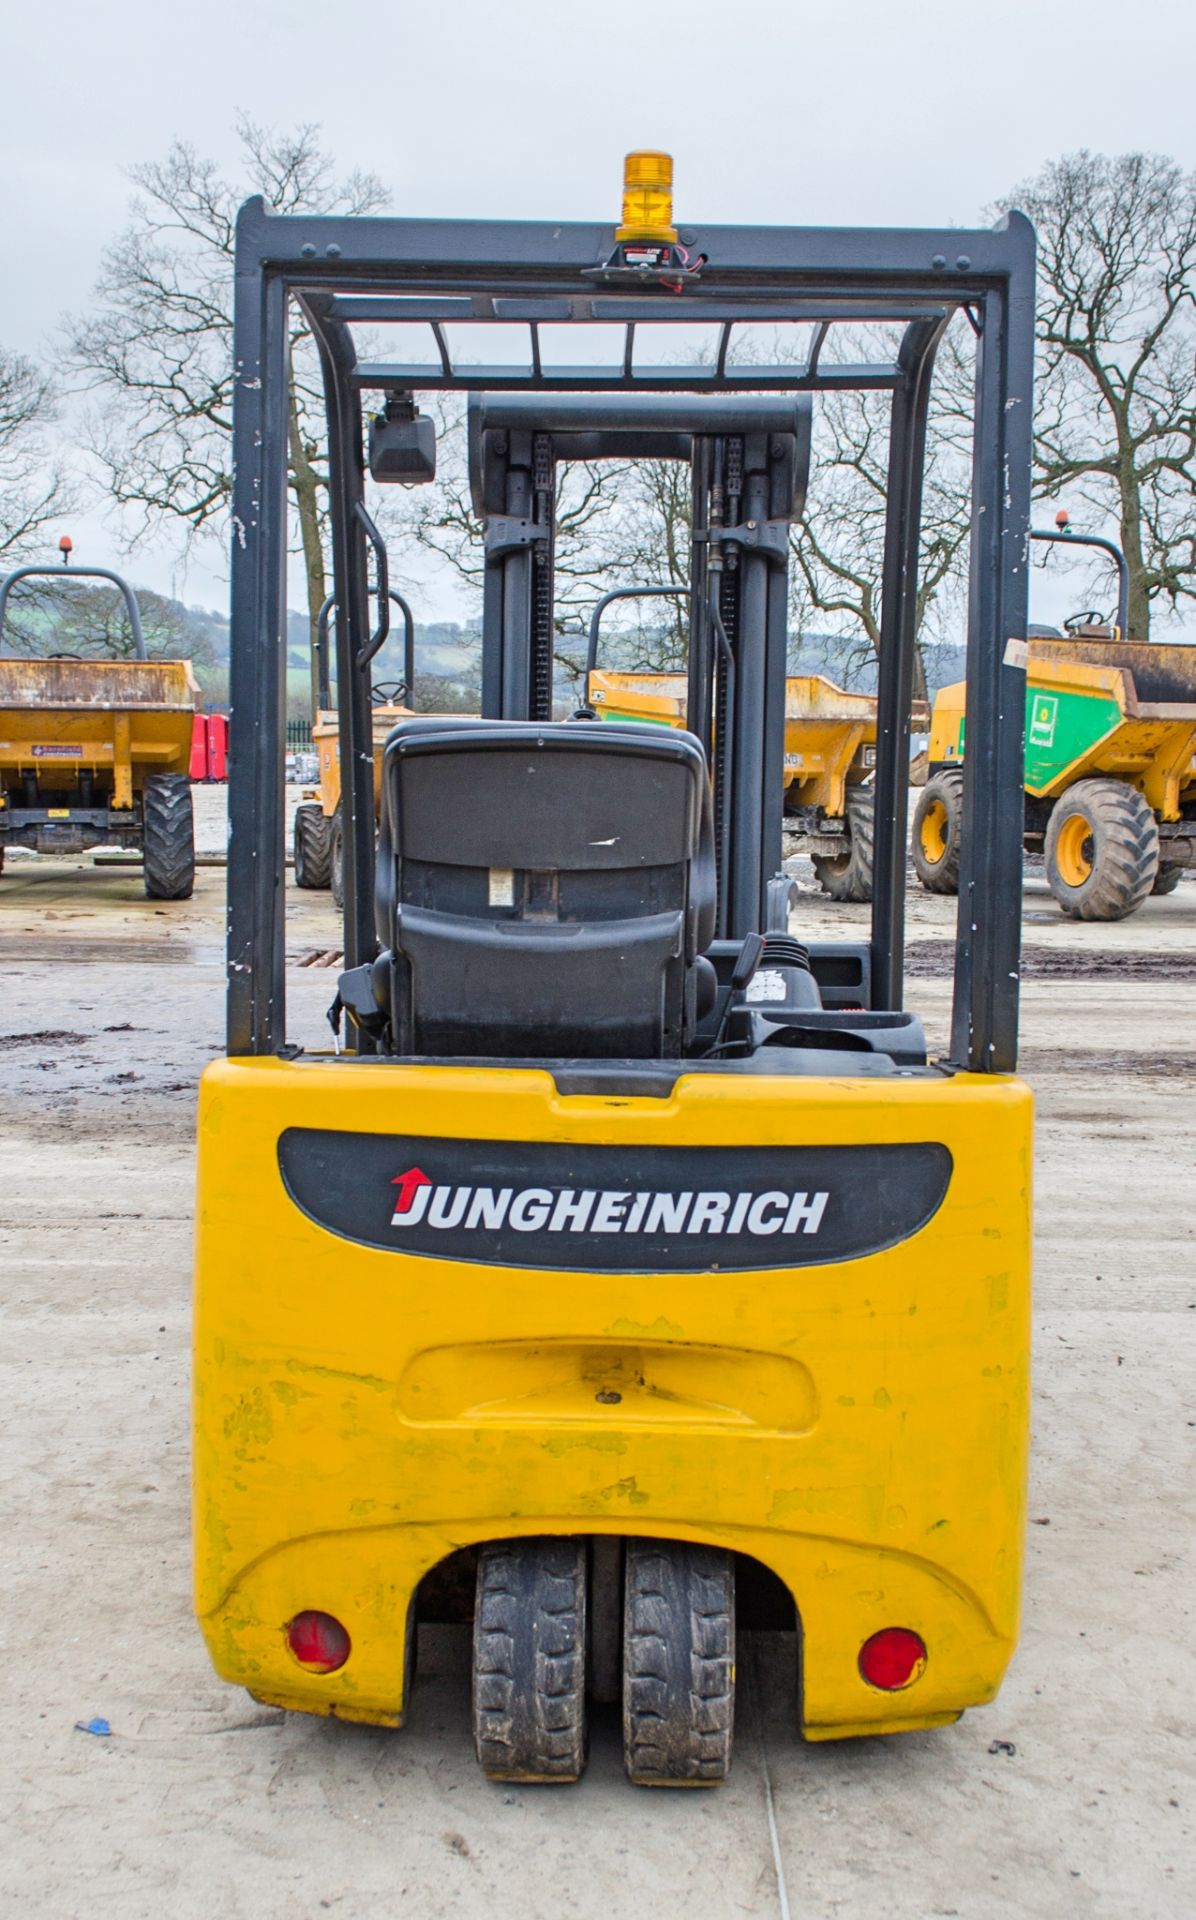 Jungheinrich EFGDF-13-4500DZ battery electric fork lift truck Year: 2001 S/N: 89918168 c/w battery - Image 6 of 14